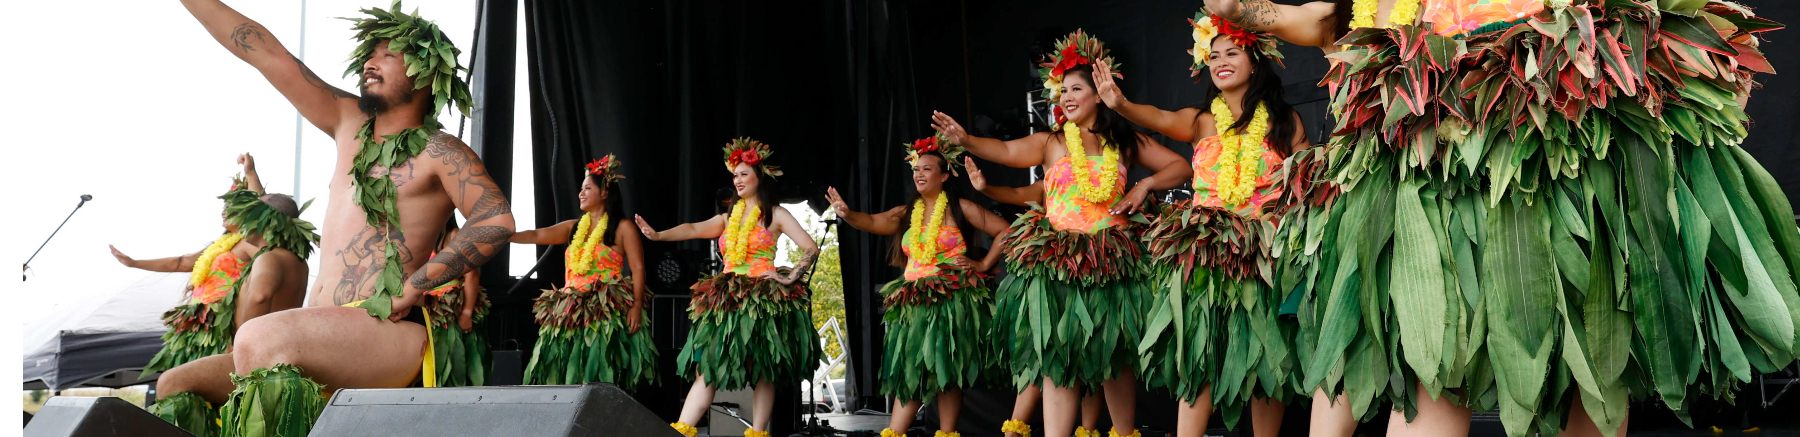 Group of dancers in Hawaiian costume on a stage performing